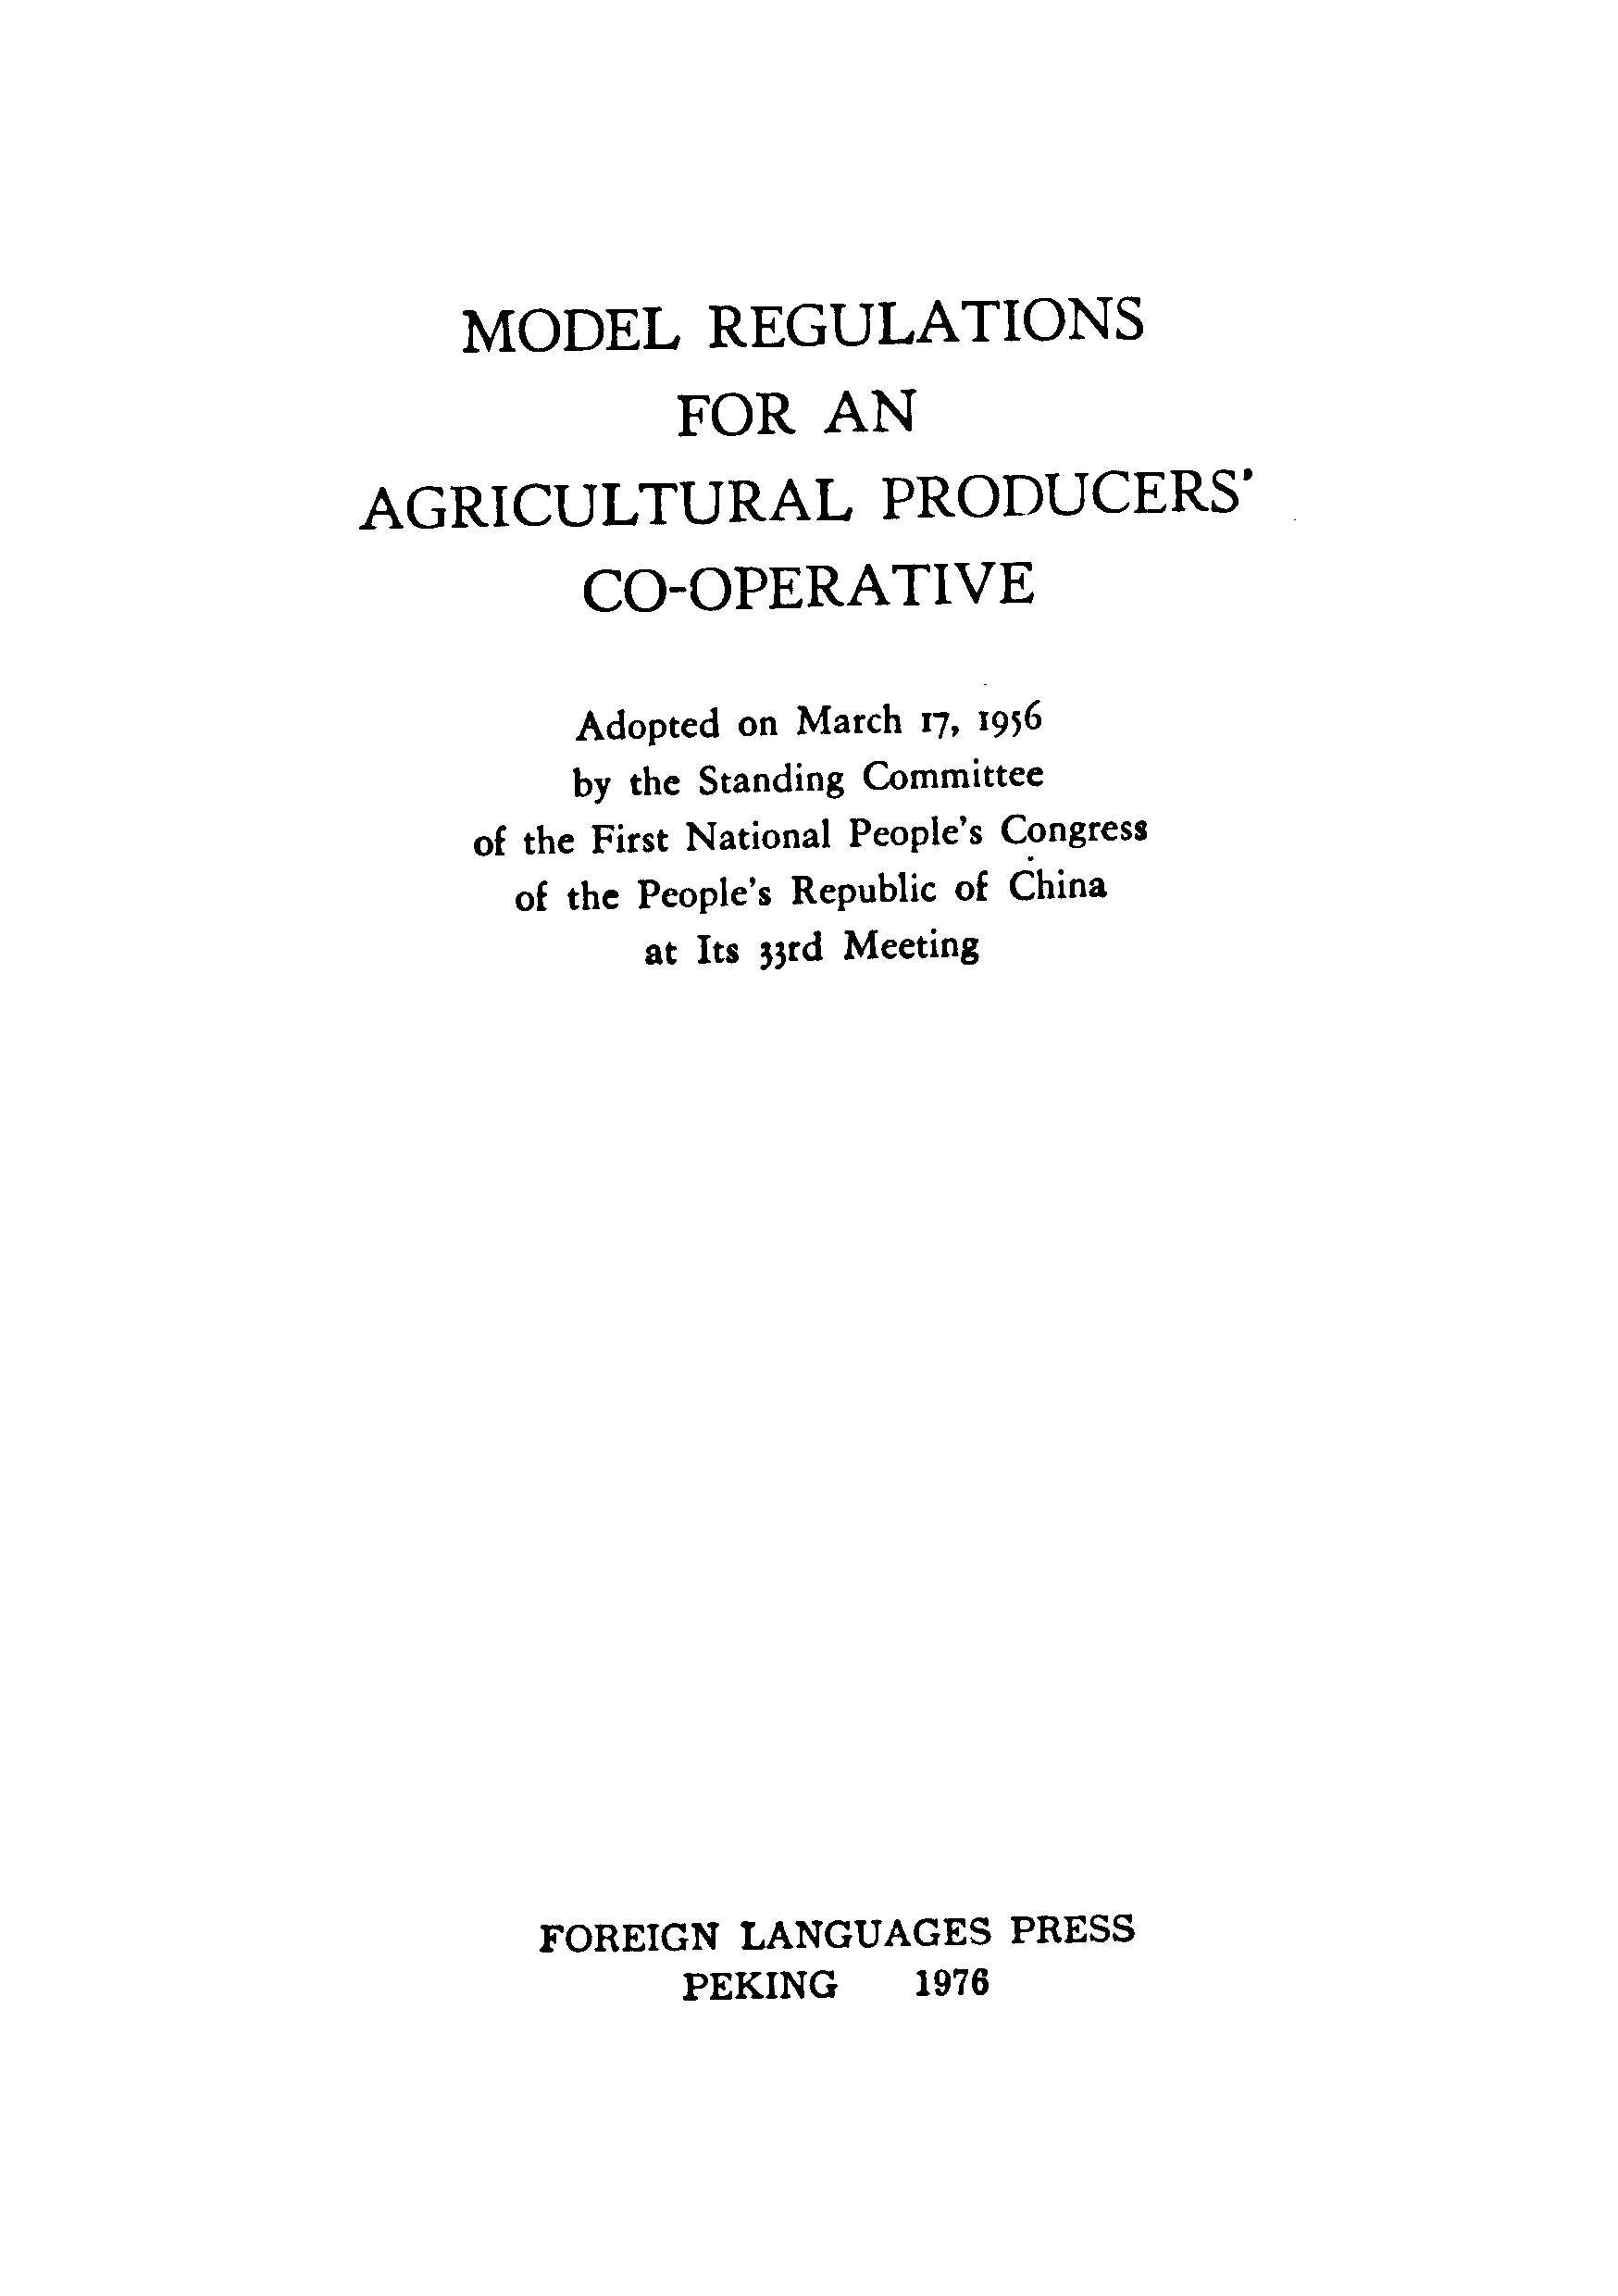 MODEL REGULATIONS FOR AN AGRICULTURAL PRODUCERS CO-OPERATIVE